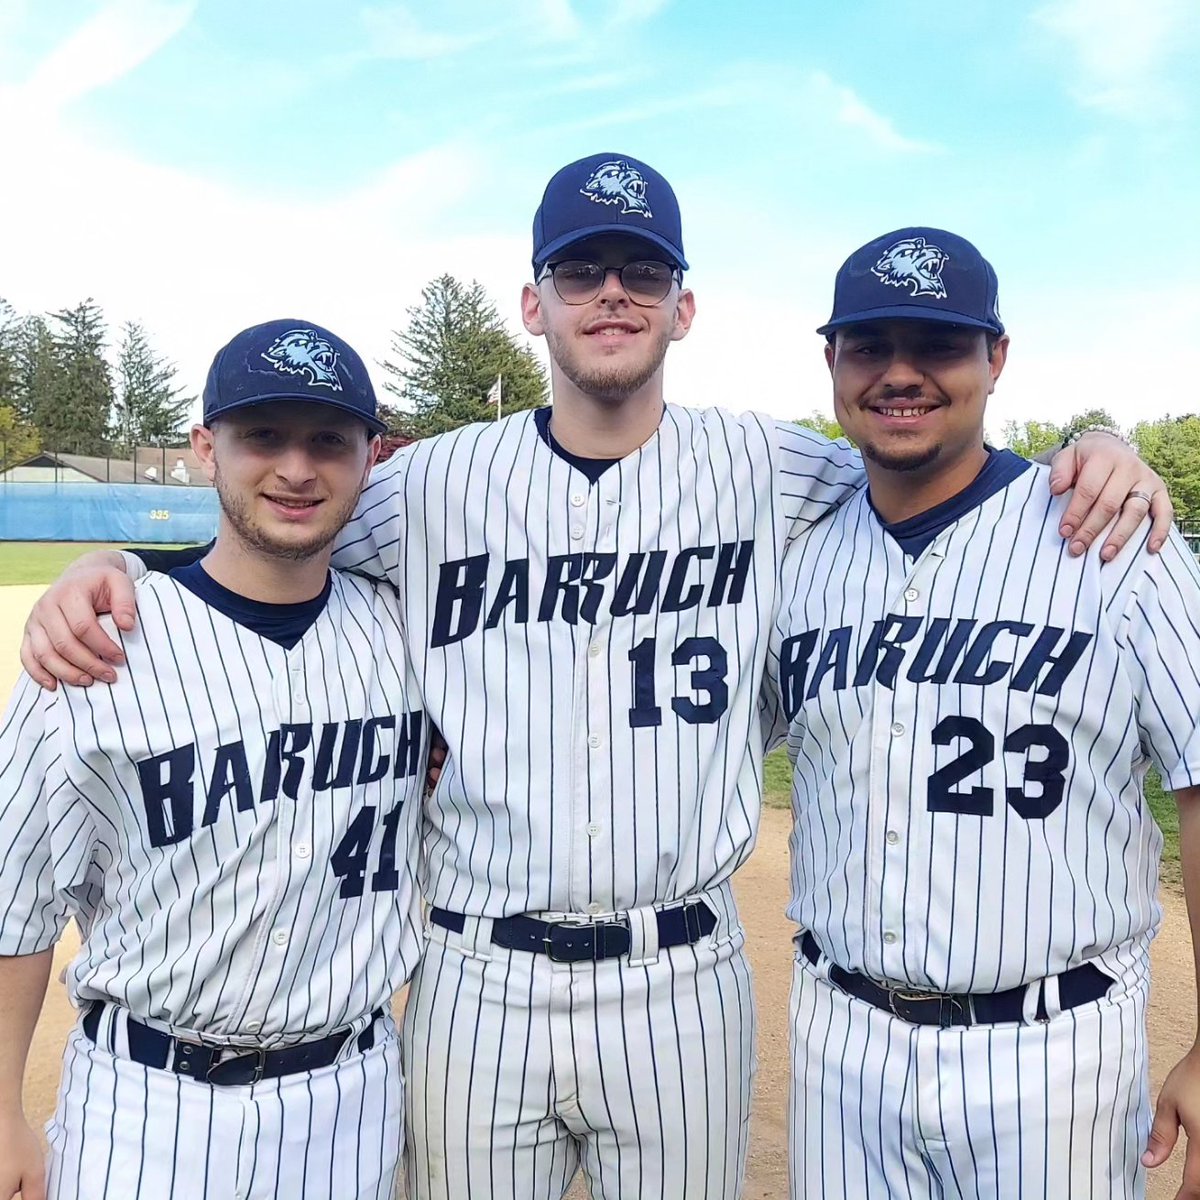 It was a Special Bearcats Appreciation Day yesterday during our CUNYAC home doubleheader against CCNY. We honored Robert Raman, Maxwell Murray and Julian Diaz in their final home game as a Bearcat! @BaruchBearcatAD @CUNYAC #d3baseball